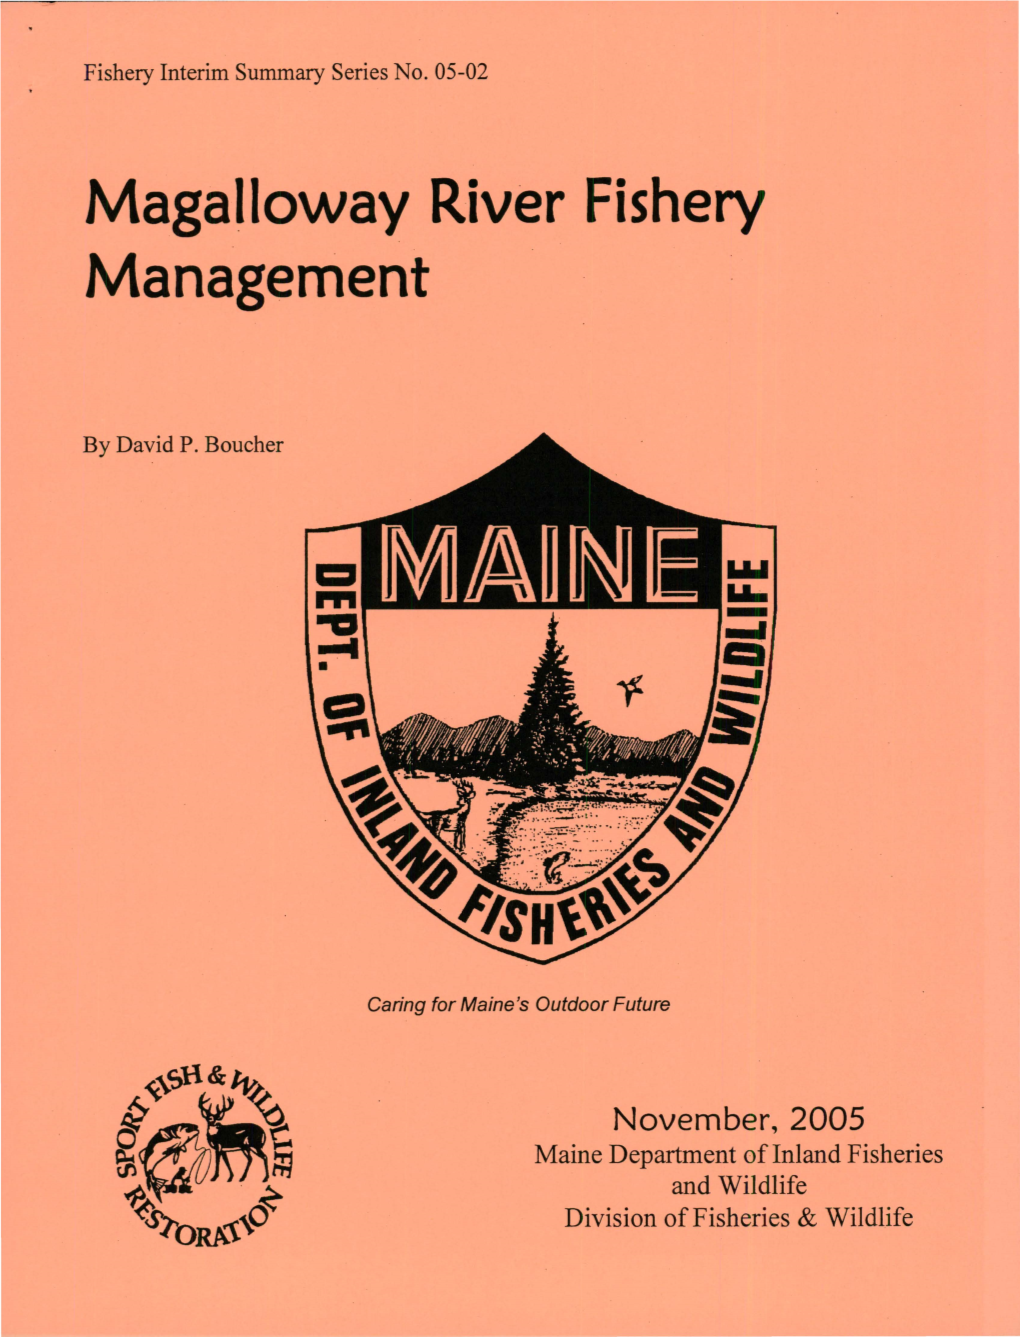 Magalloway River Fishery Management